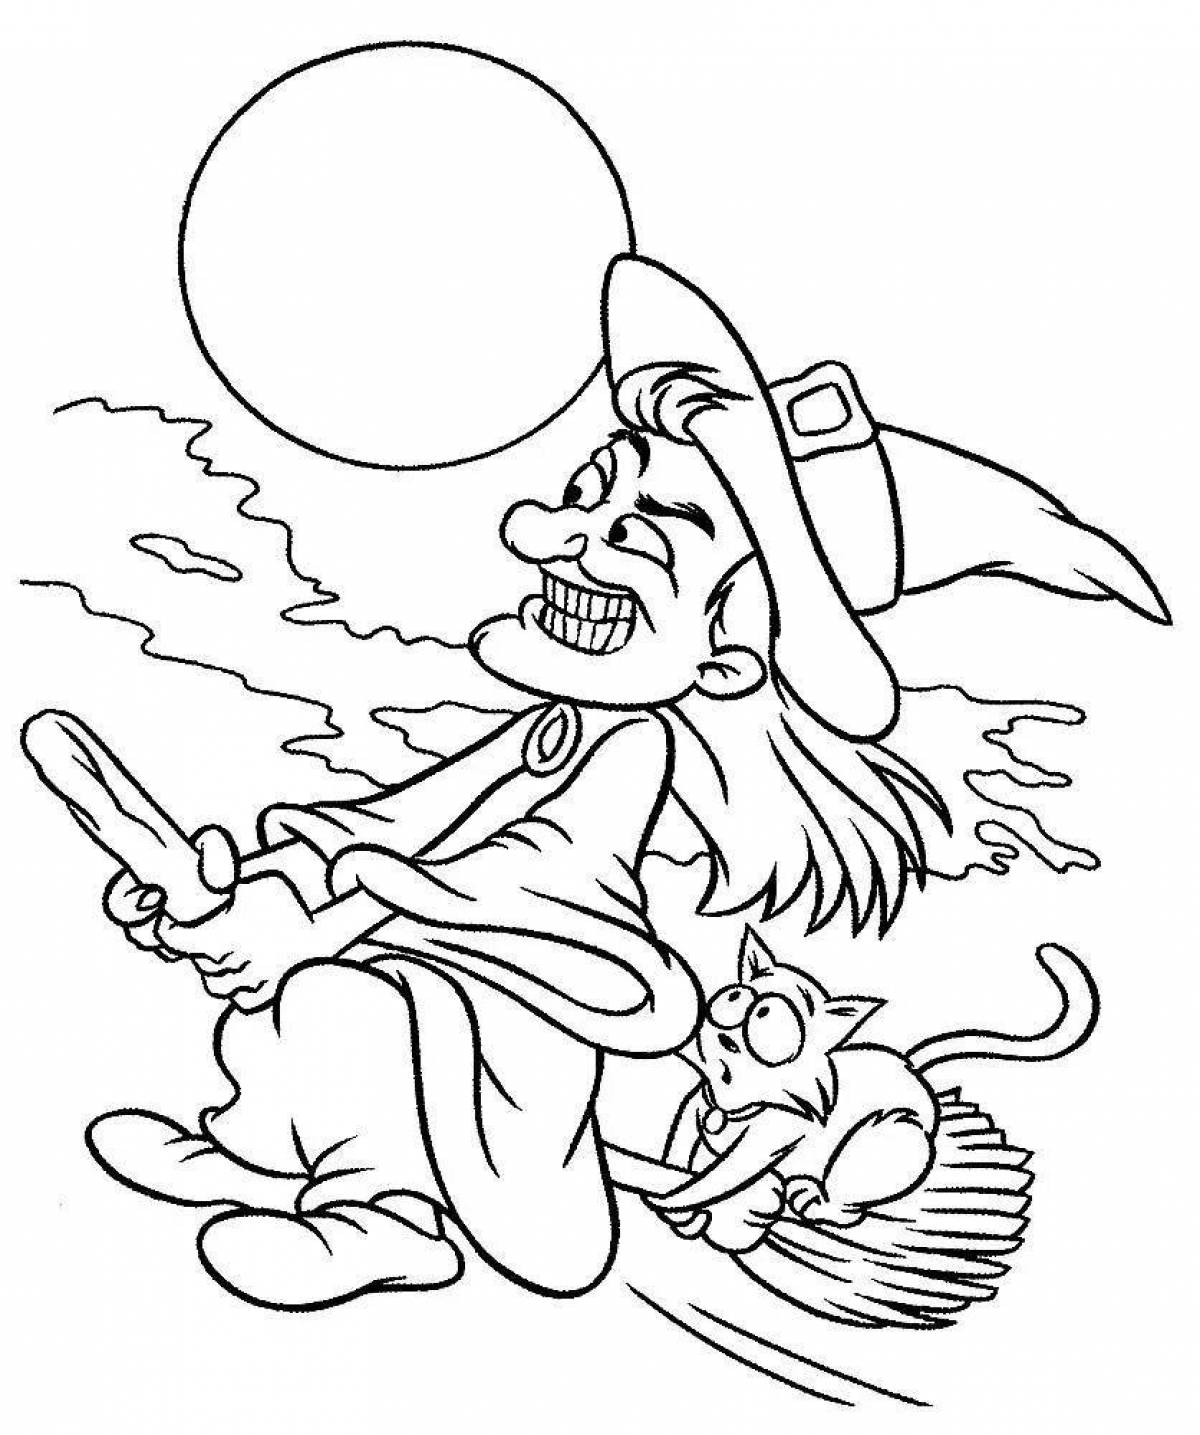 Wicked witch scary coloring book